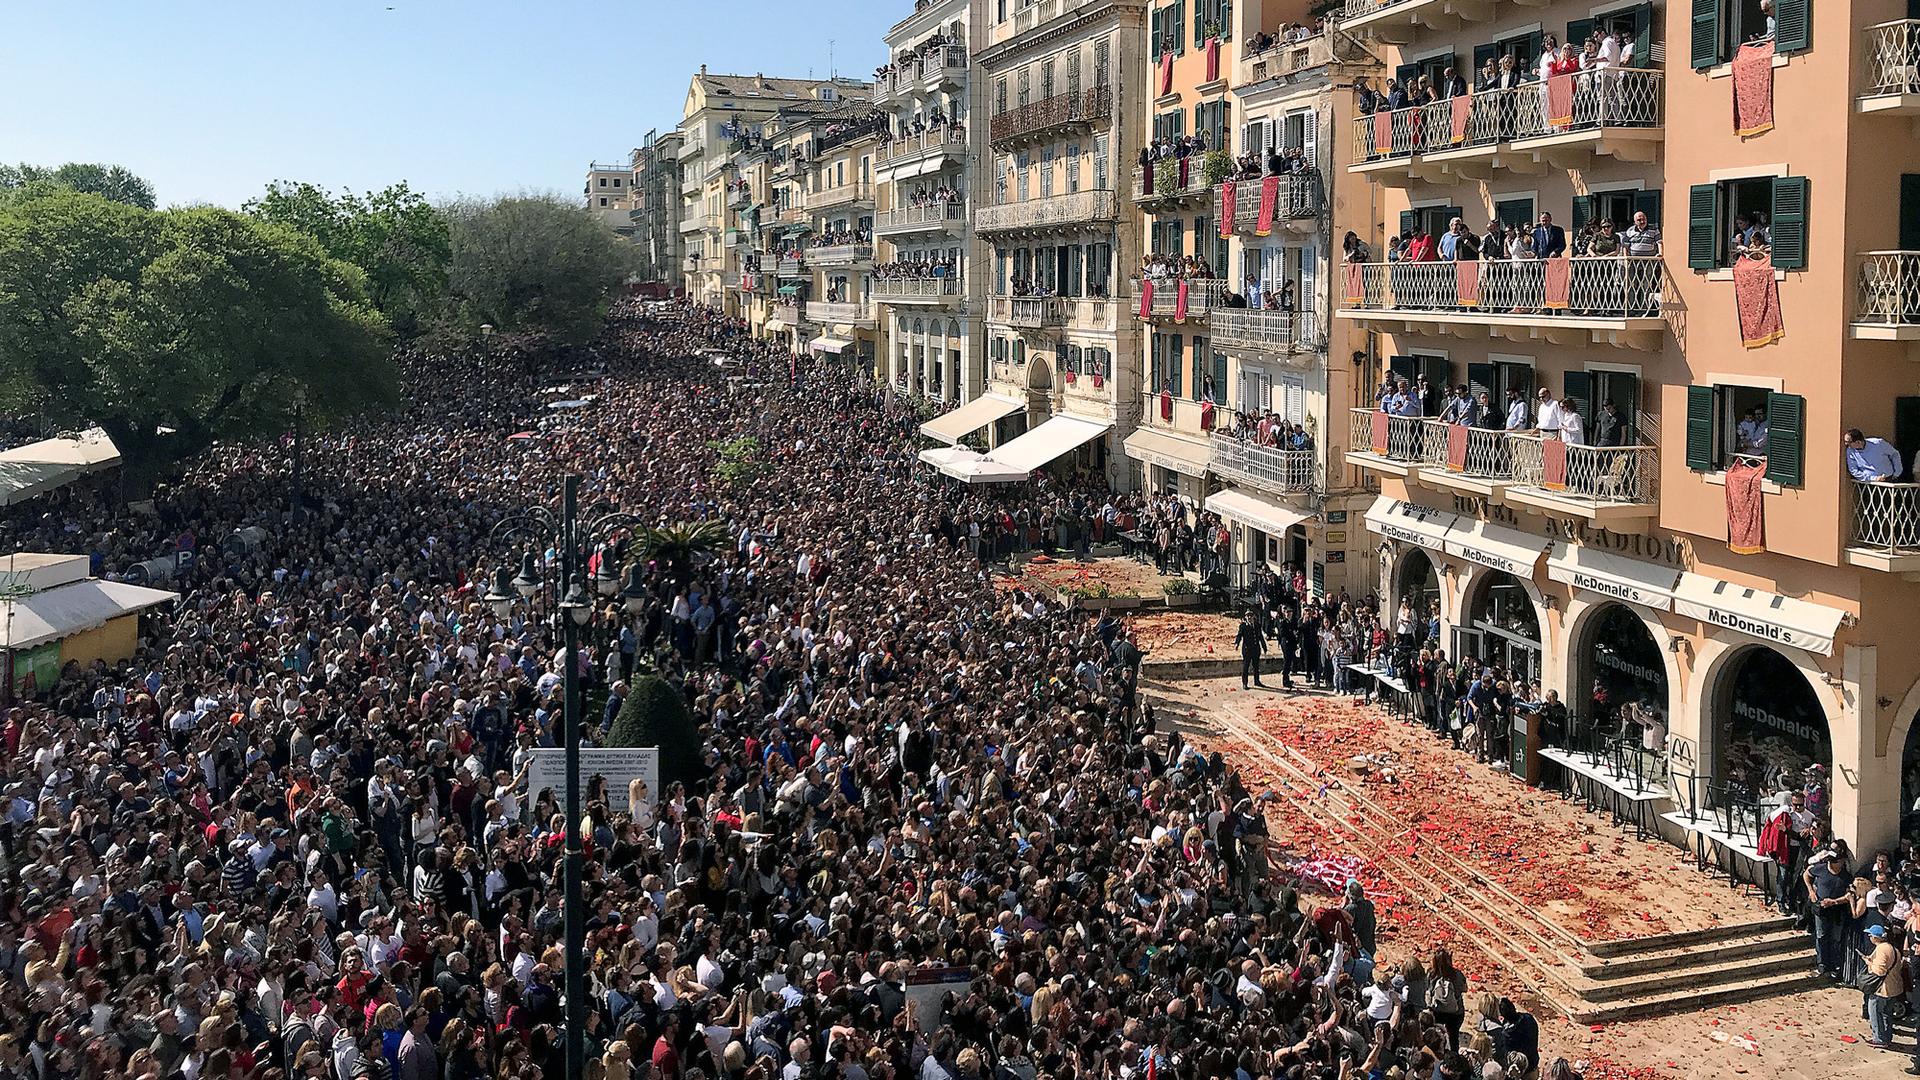 Crowds of people stand in the street while others hang out of windows. Below the windows are the red shards from the clay pots falling on the pavement.